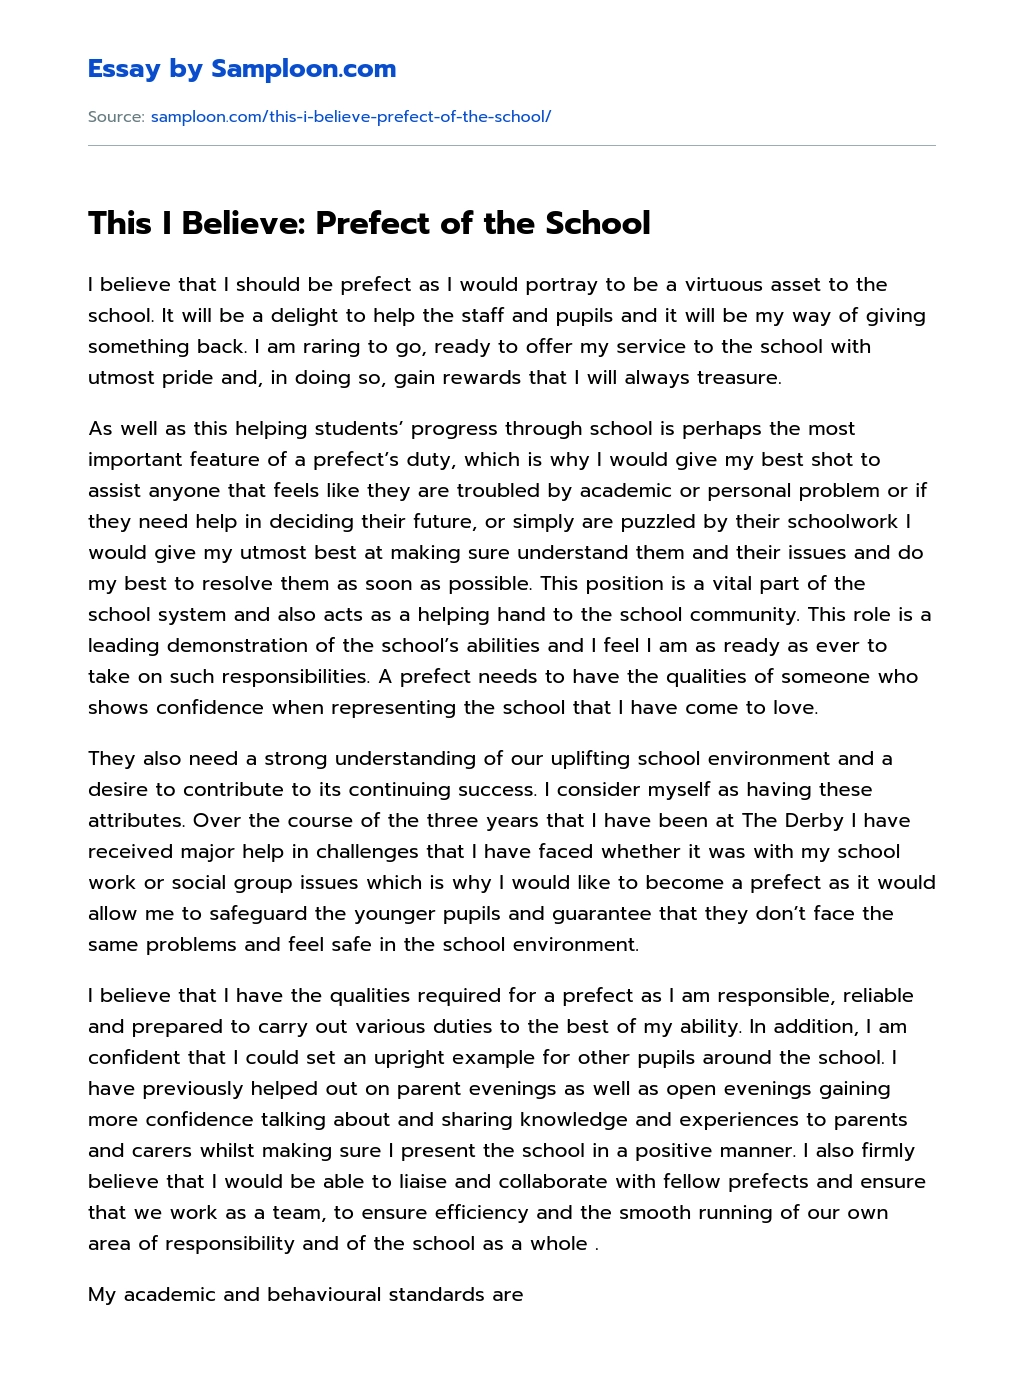 This I Believe: Prefect of the School Application essay